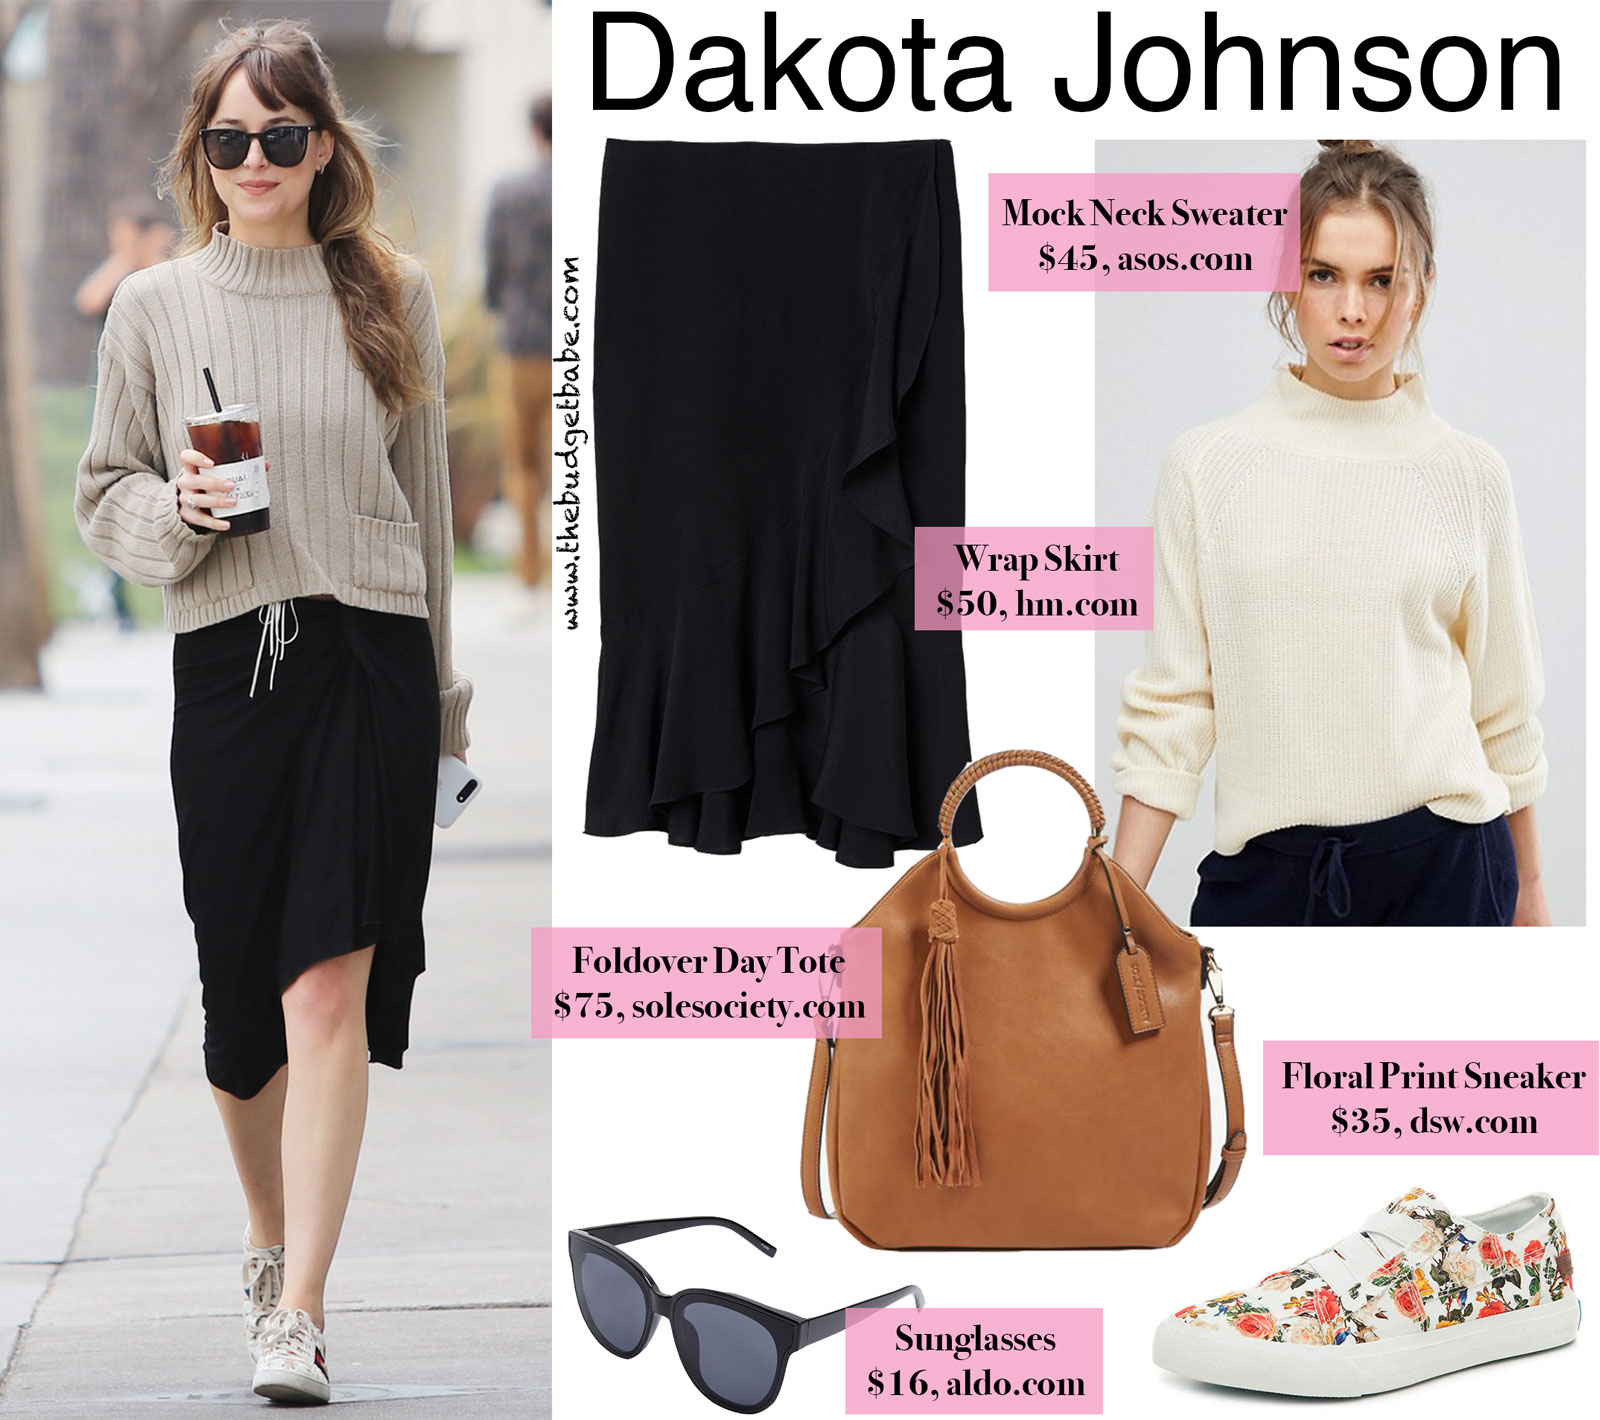 Dakota Johnson Mock Neck Sweater and Gucci Floral Sneakers Look for Less